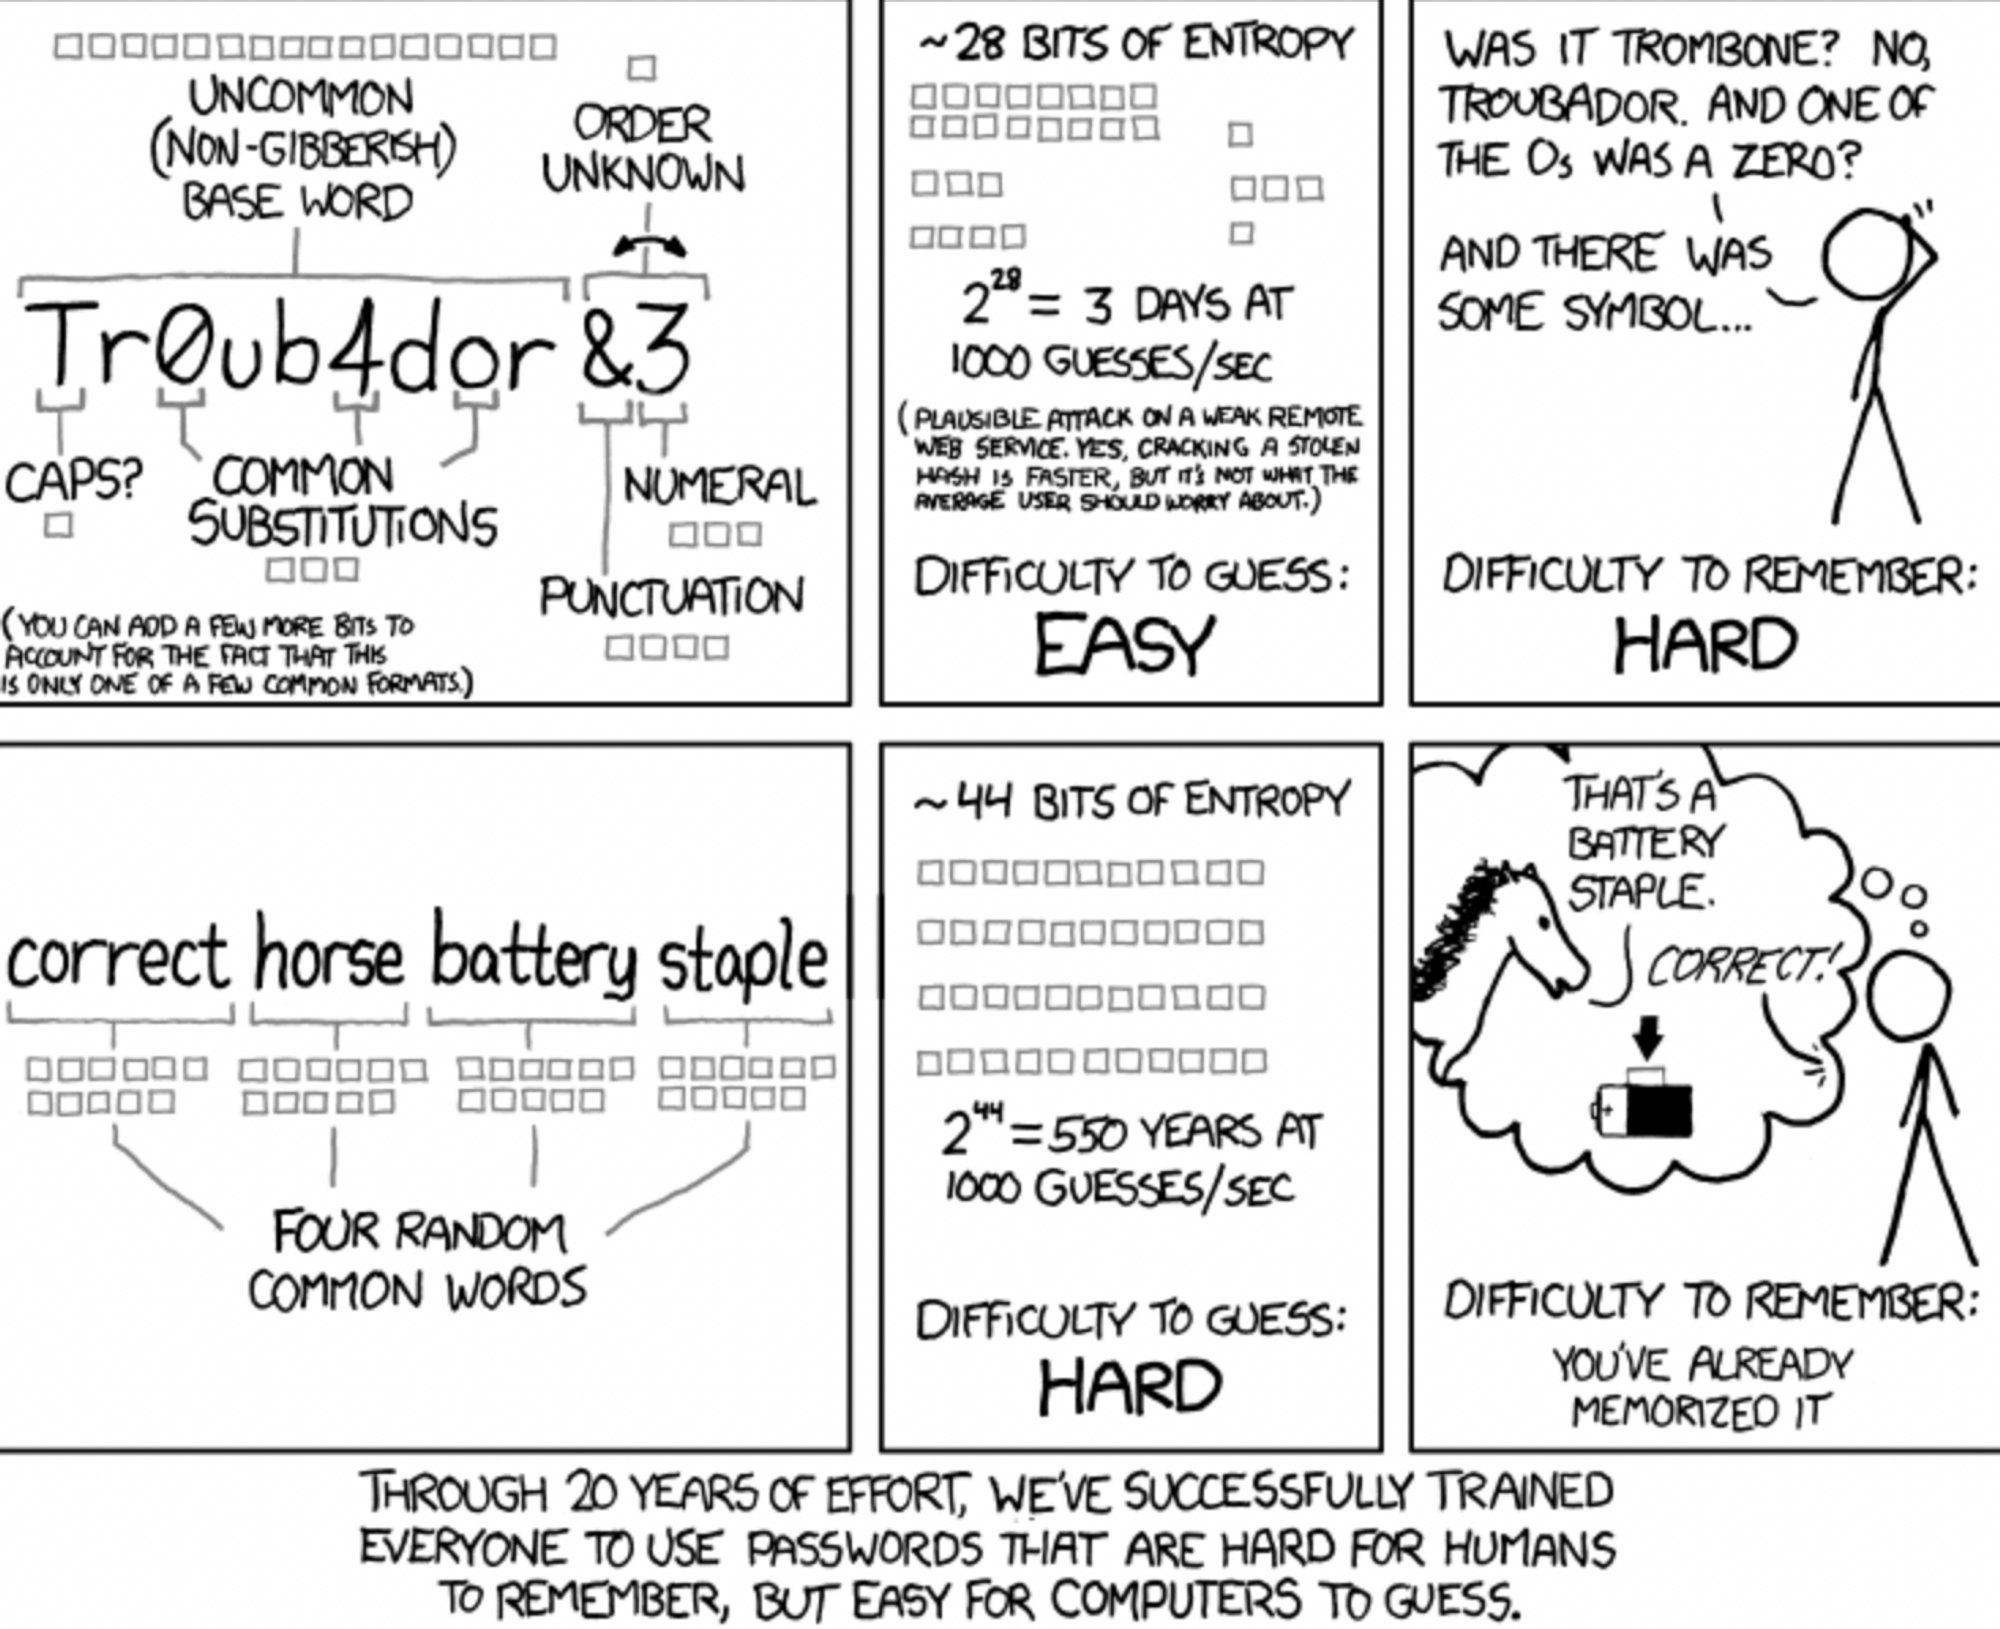 xkcd1.png